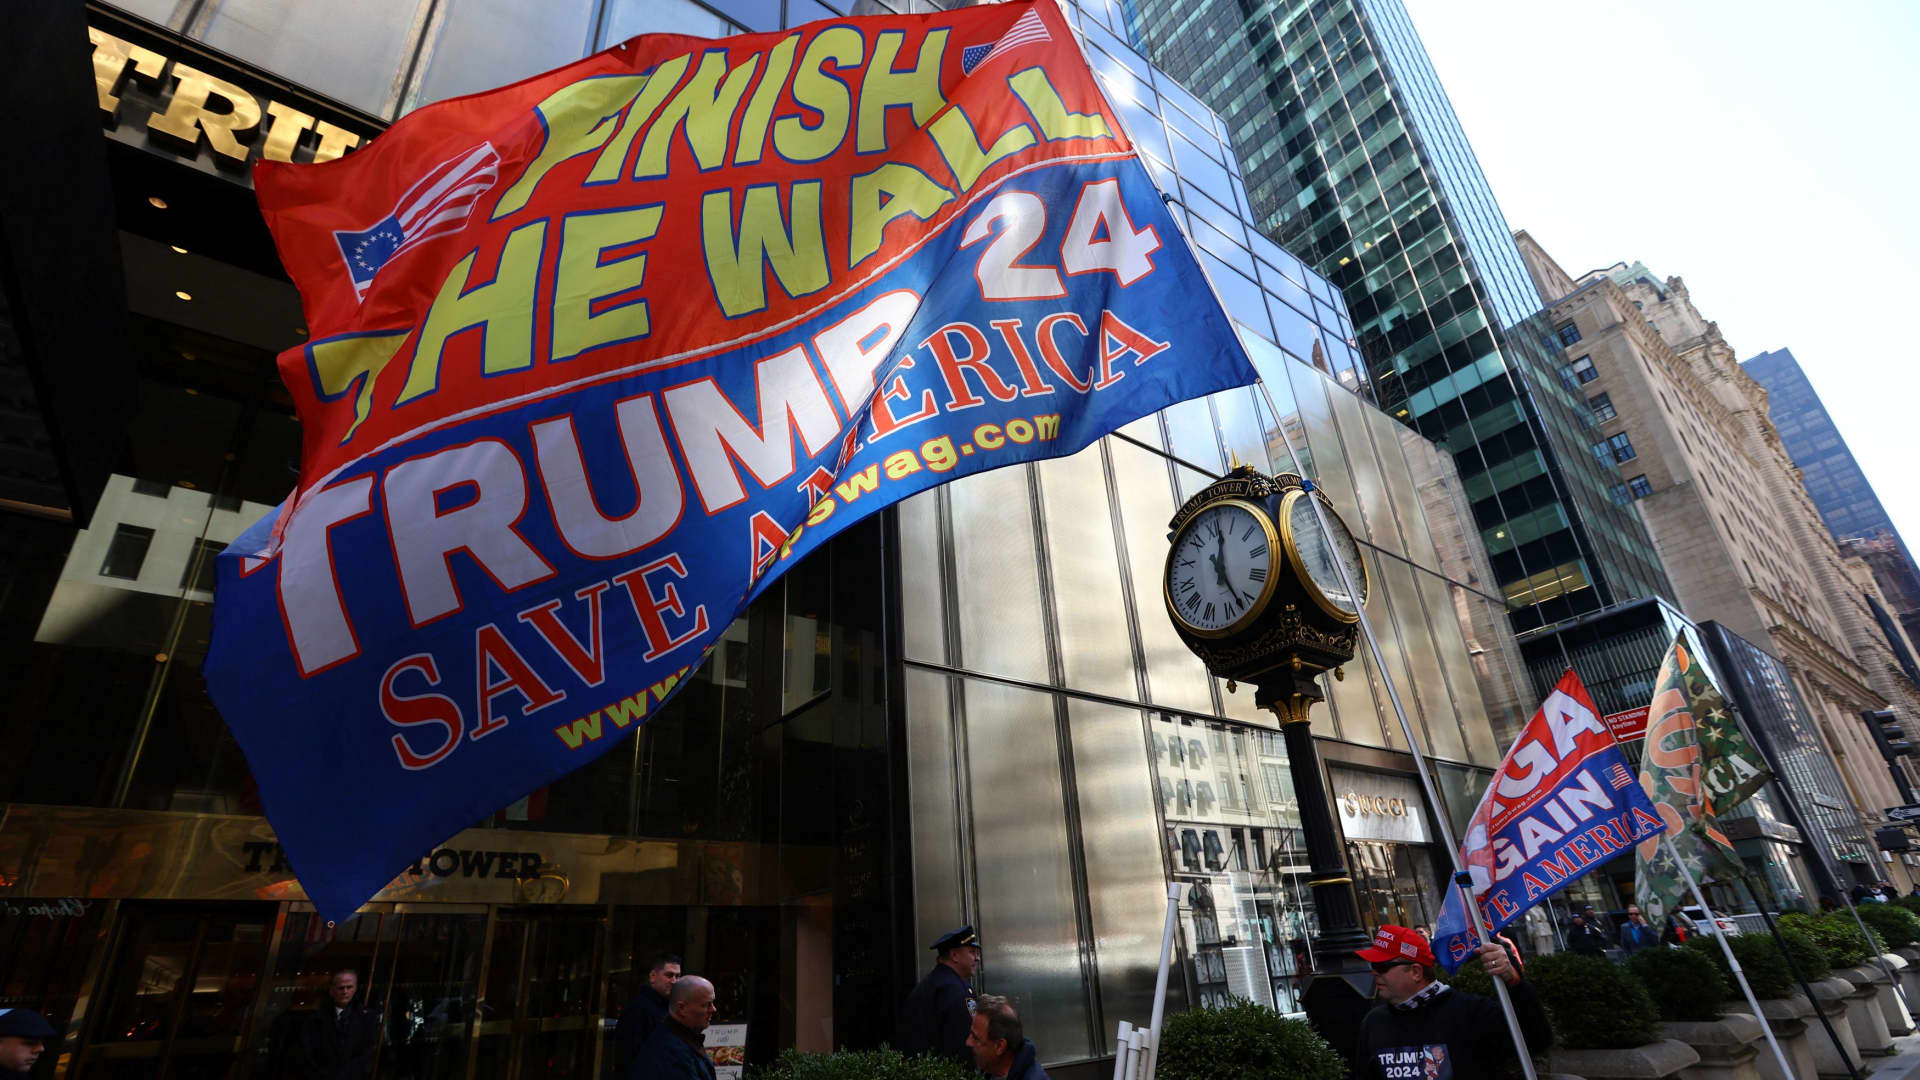 A man who identified himself as Don Cini, a supporter of former U.S. President Donald Trump, flies Trump campaign flags outside Trump Tower in midtown Manhattan in New York City, New York, March 20, 2023.